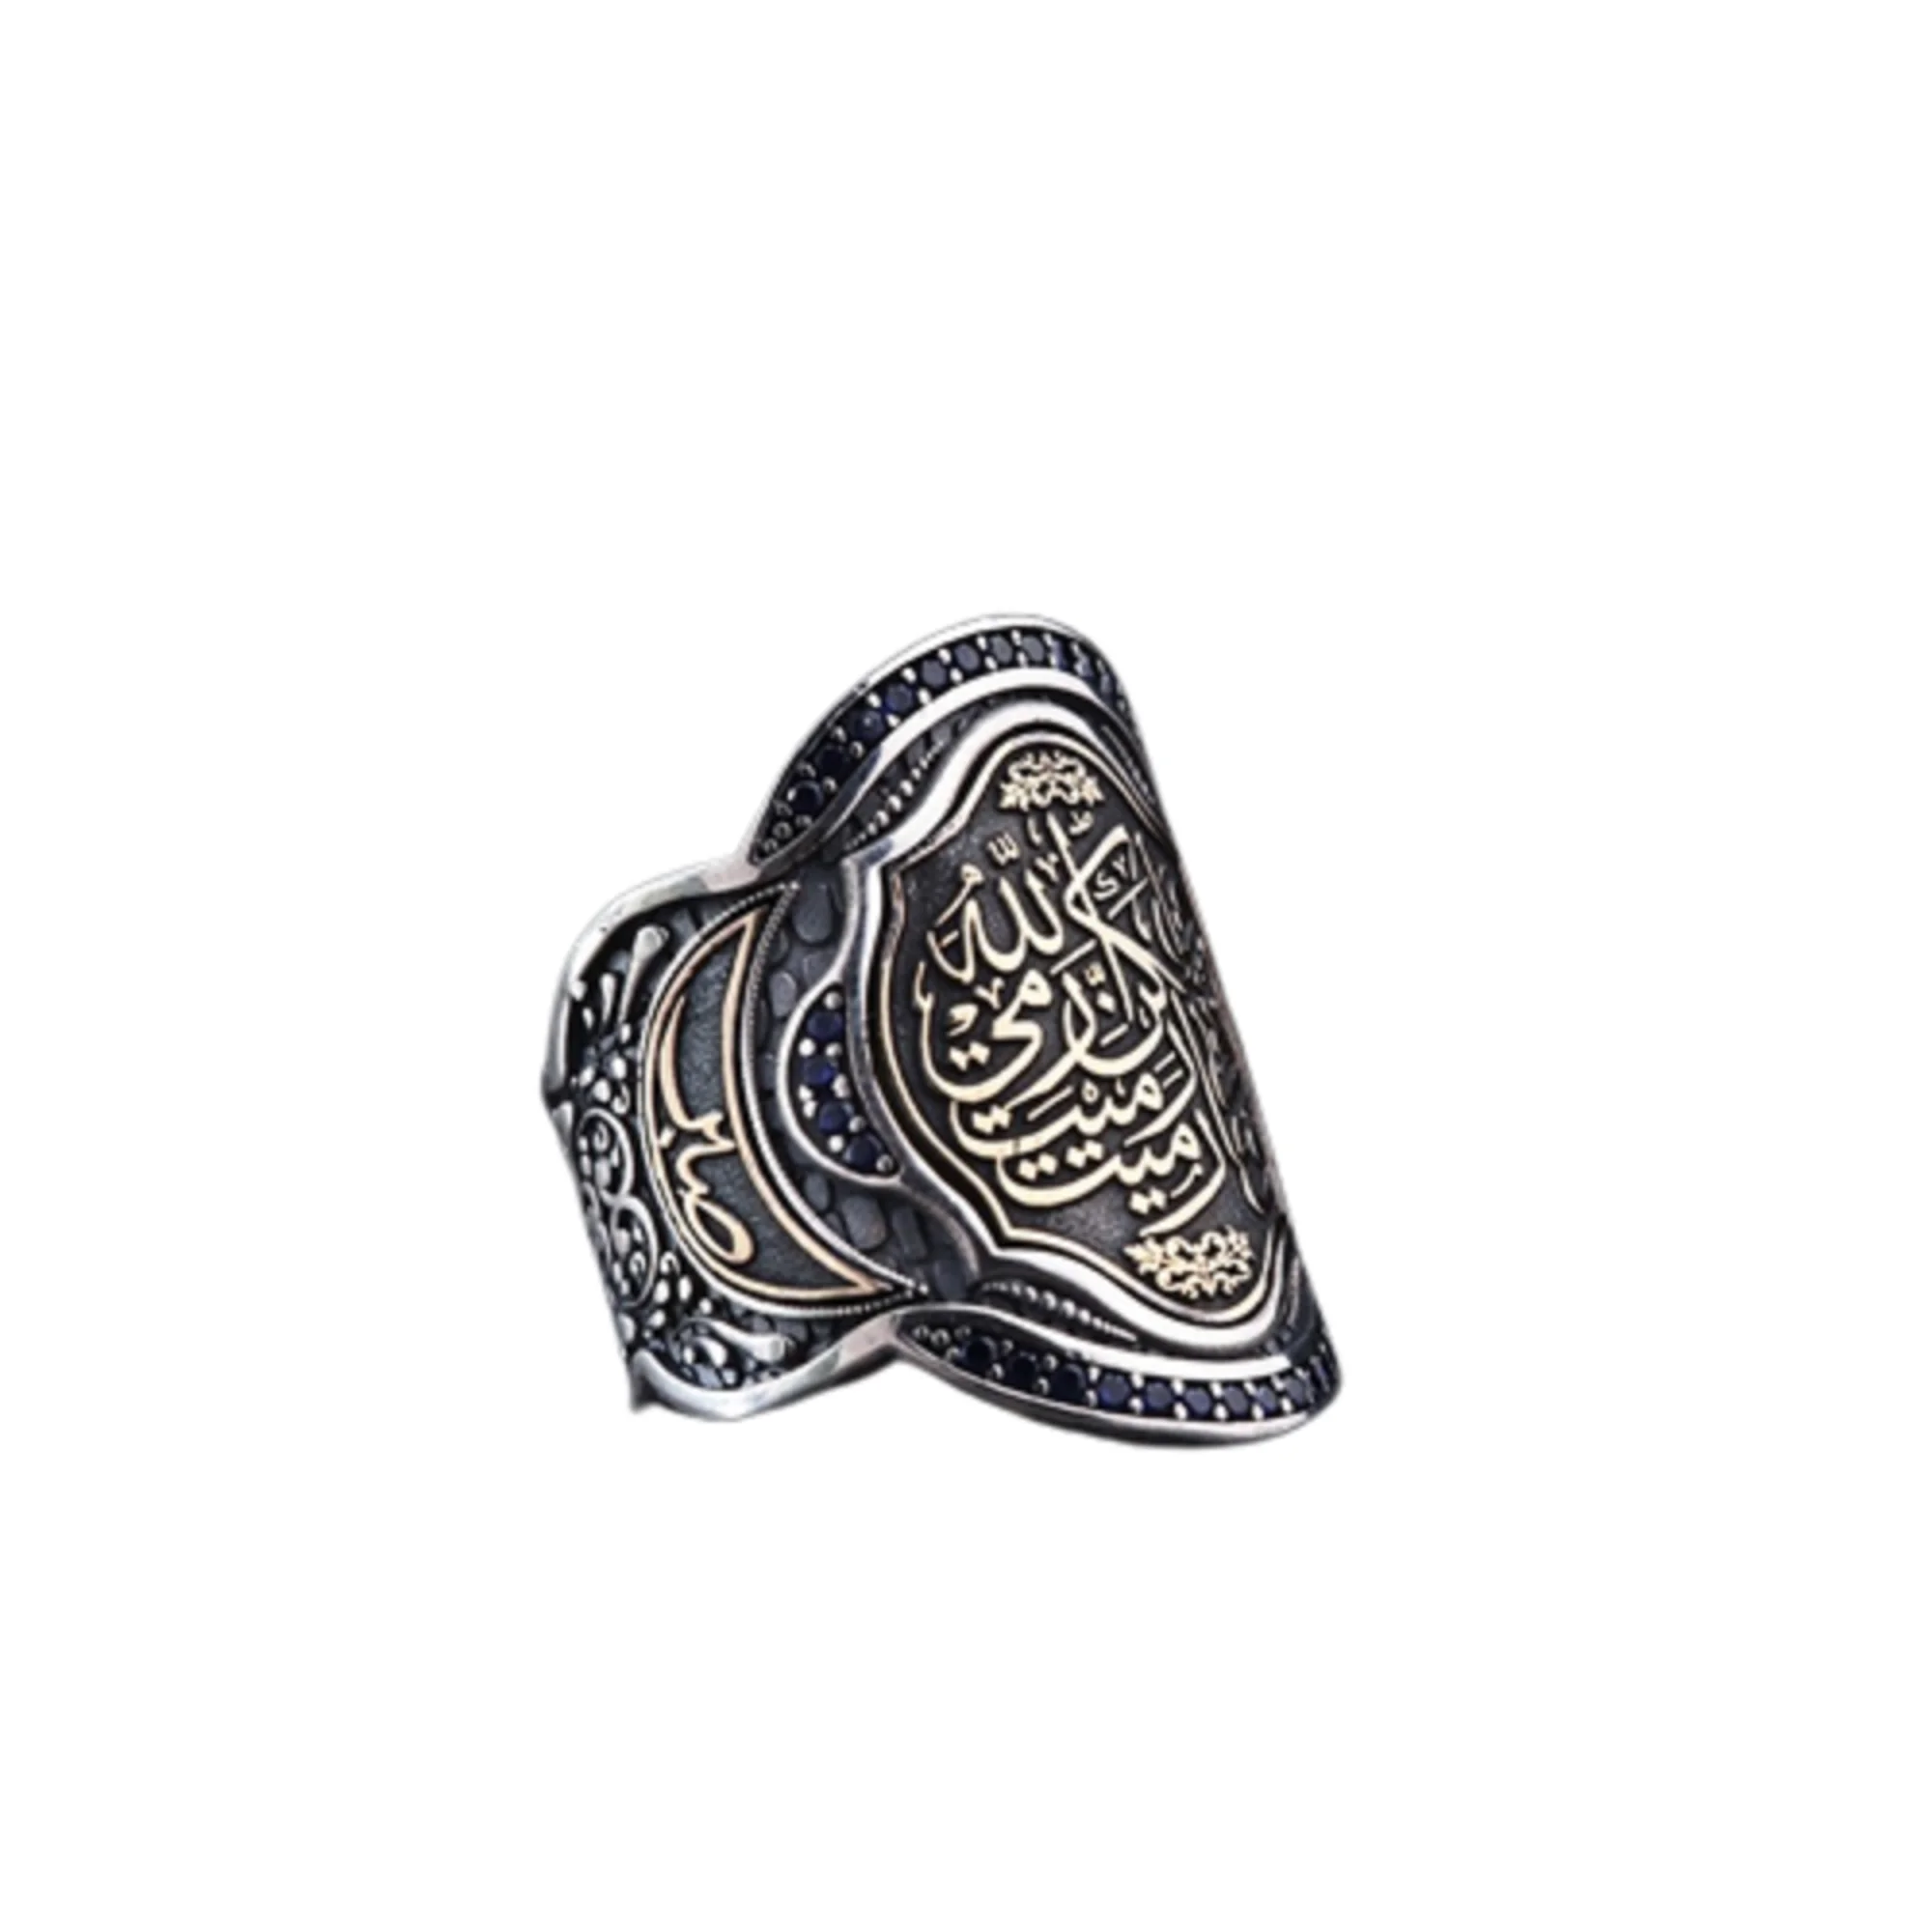 Archer Thumb Zihgir Ring Islamic Gifts For Him Archery ornament Personalized Islamic For Hem Male Silver Men Gifts Muslim